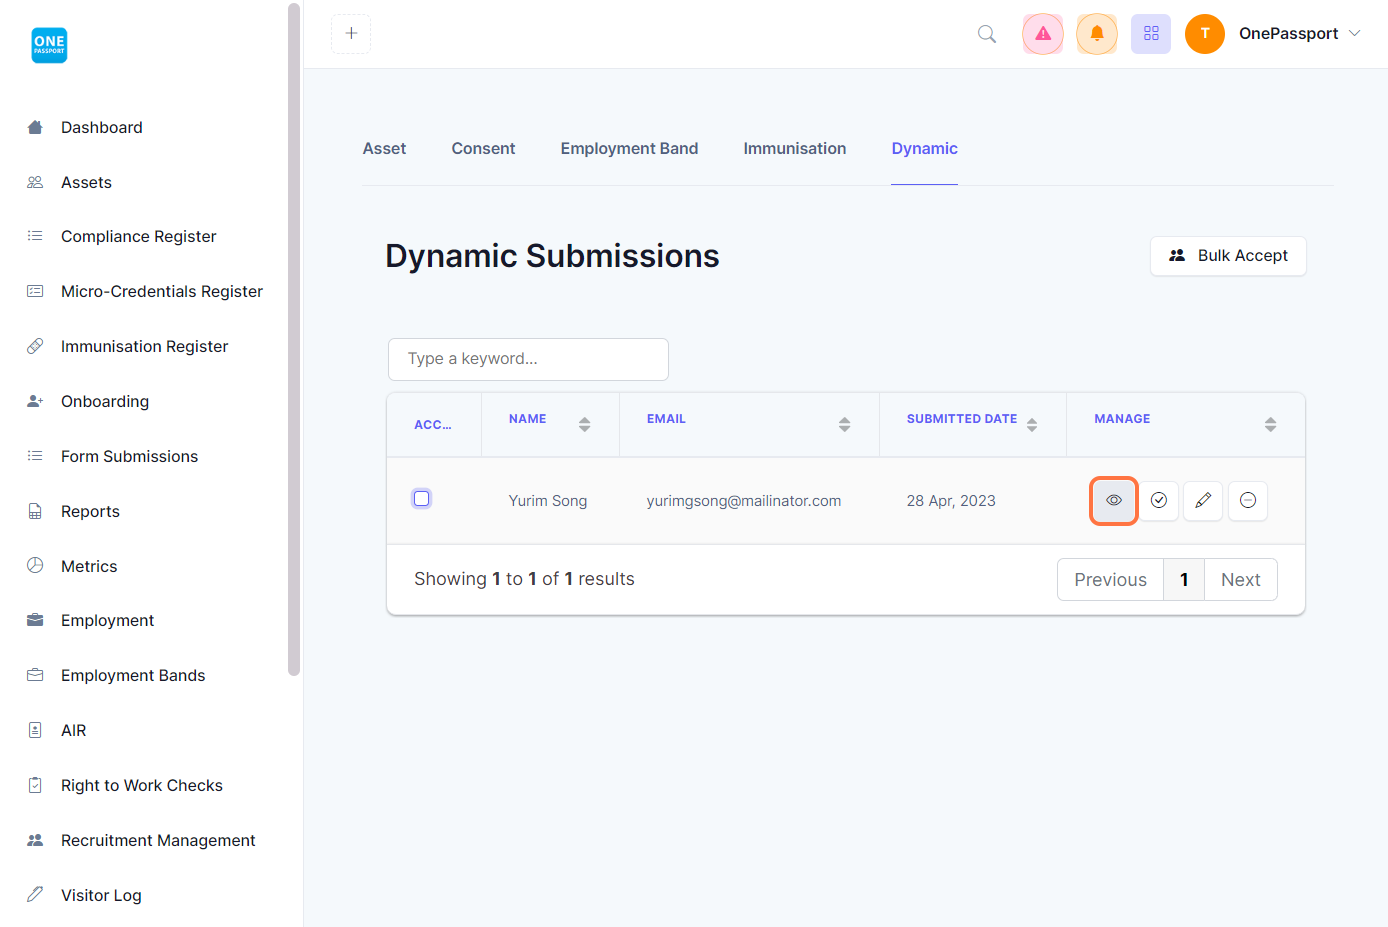 Same action buttons appear in the Manage column. You may view, accept, edit, or ignore submission. 